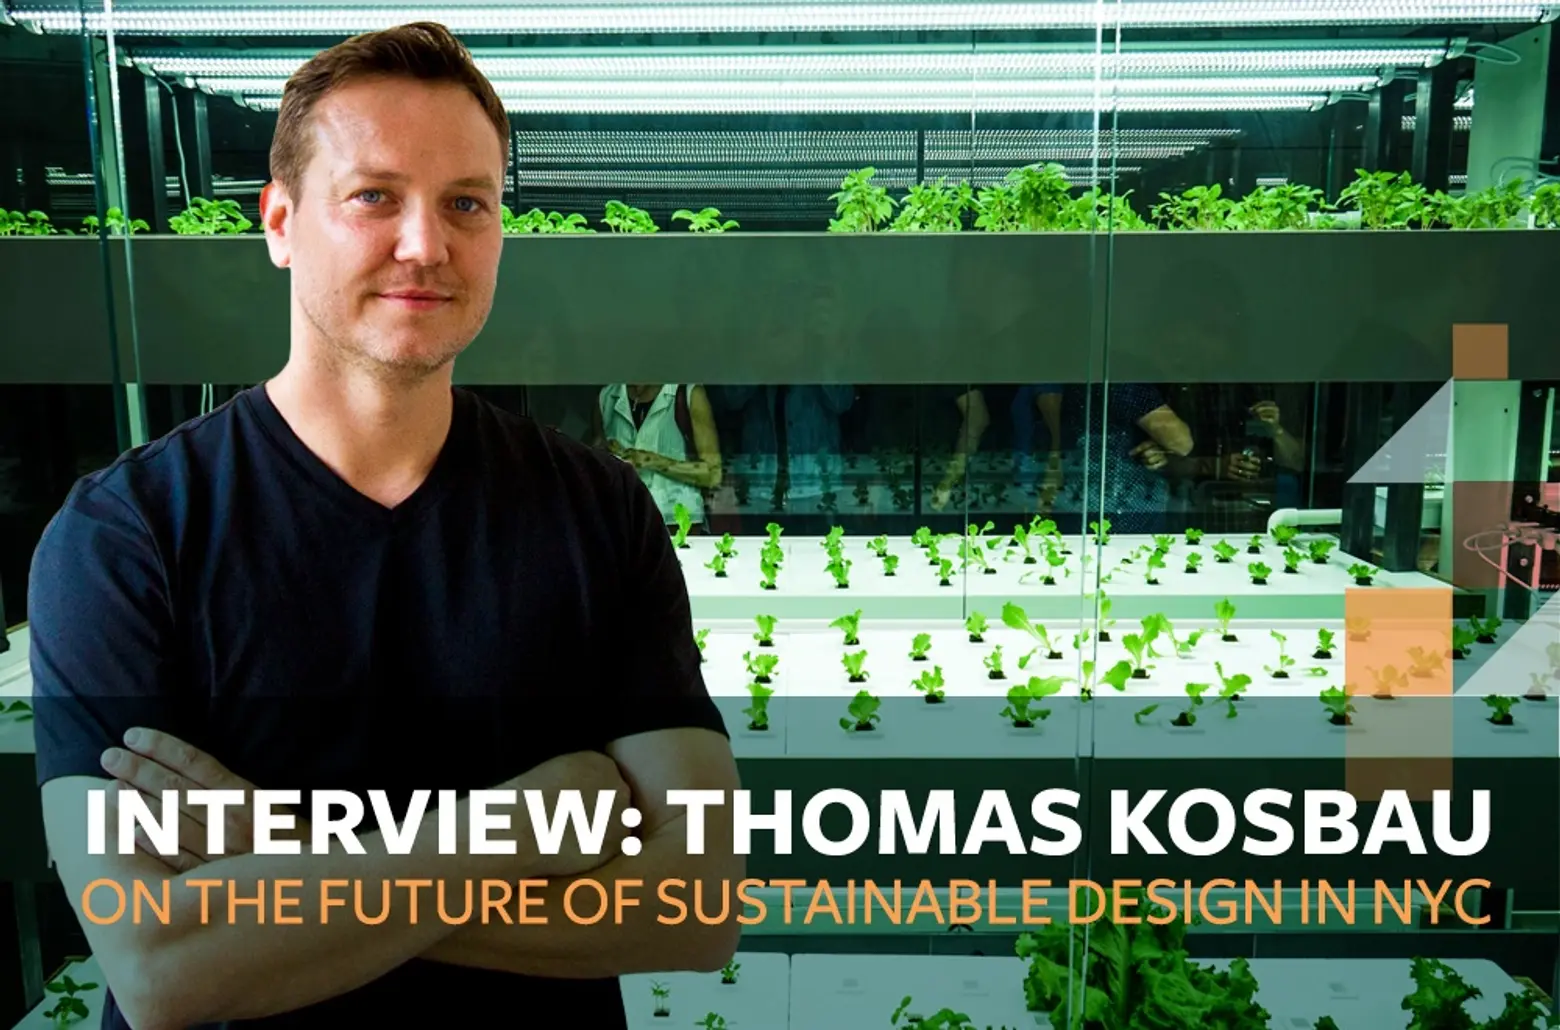 INTERVIEW: Architect Thomas Kosbau on the exciting future of sustainable design in NYC